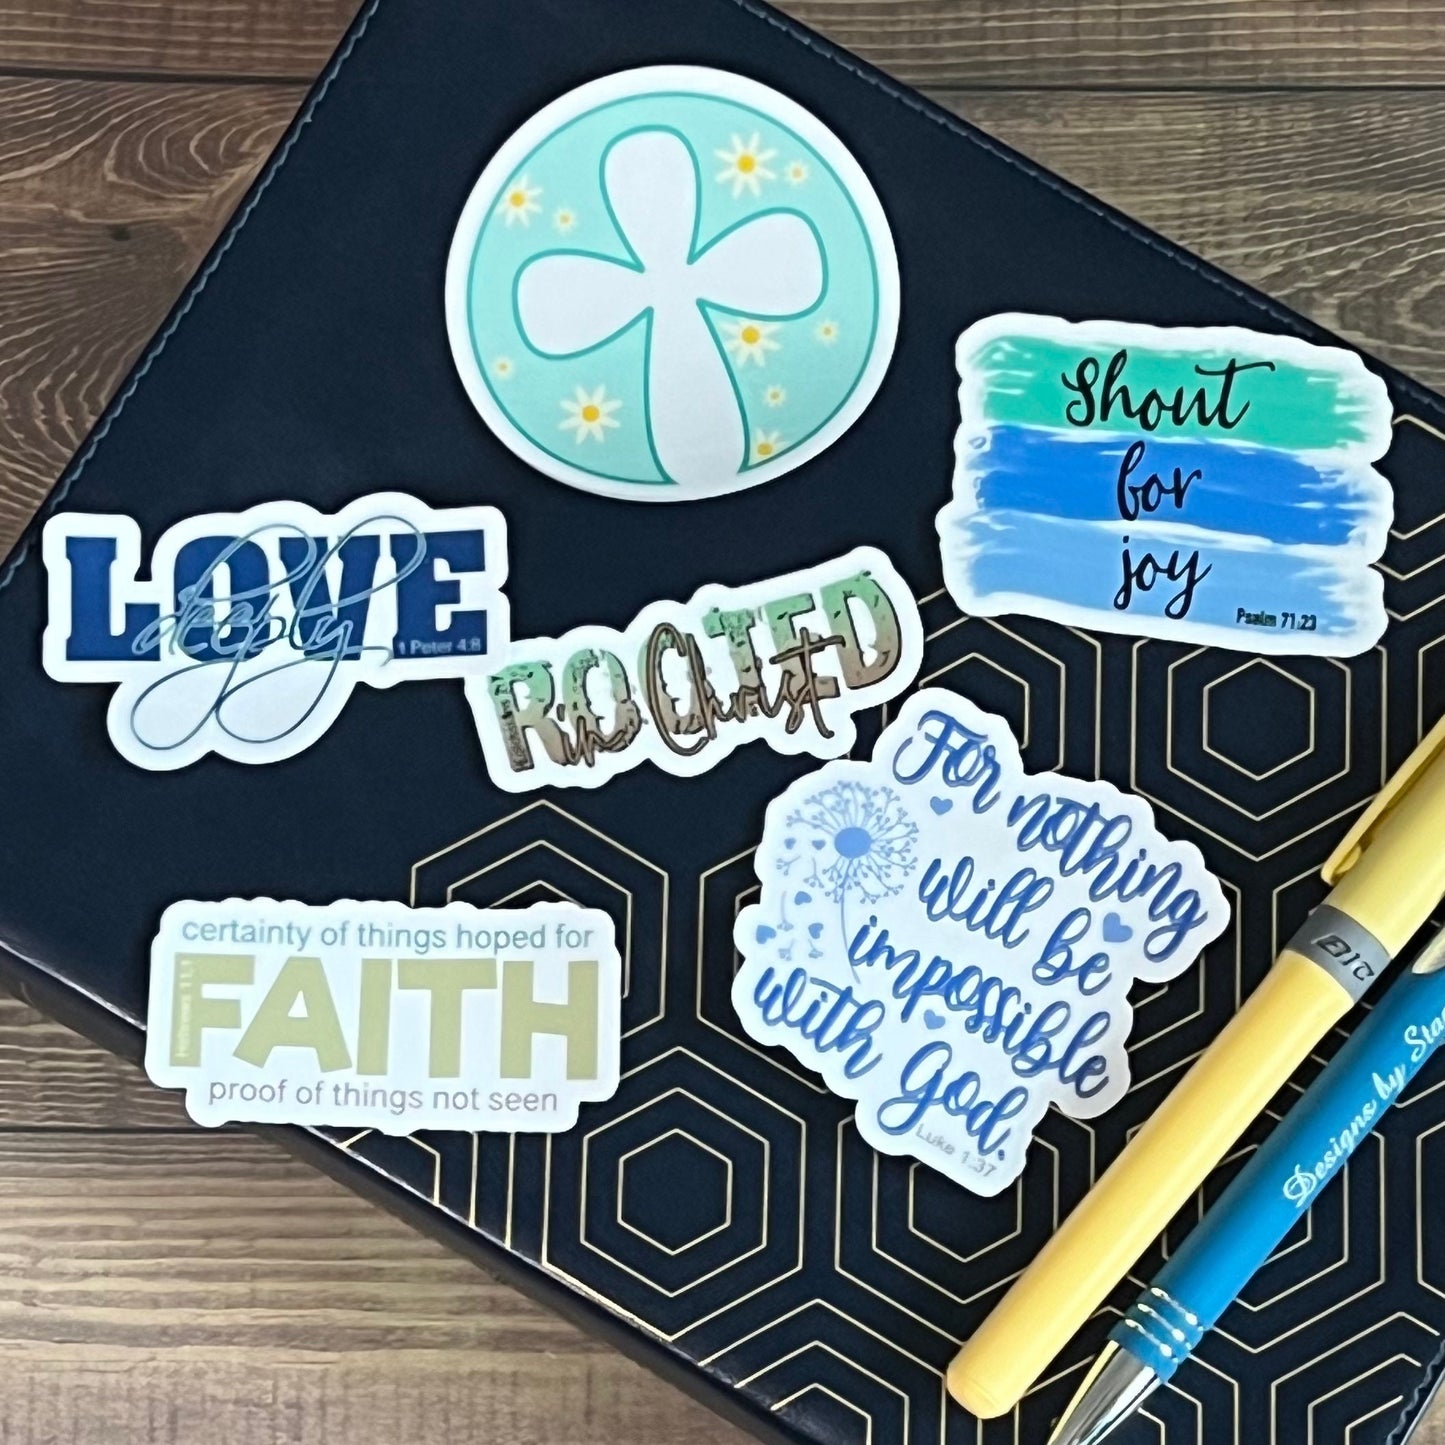 Christian Sticker Pack, Six Faith Stickers, Religious Decals